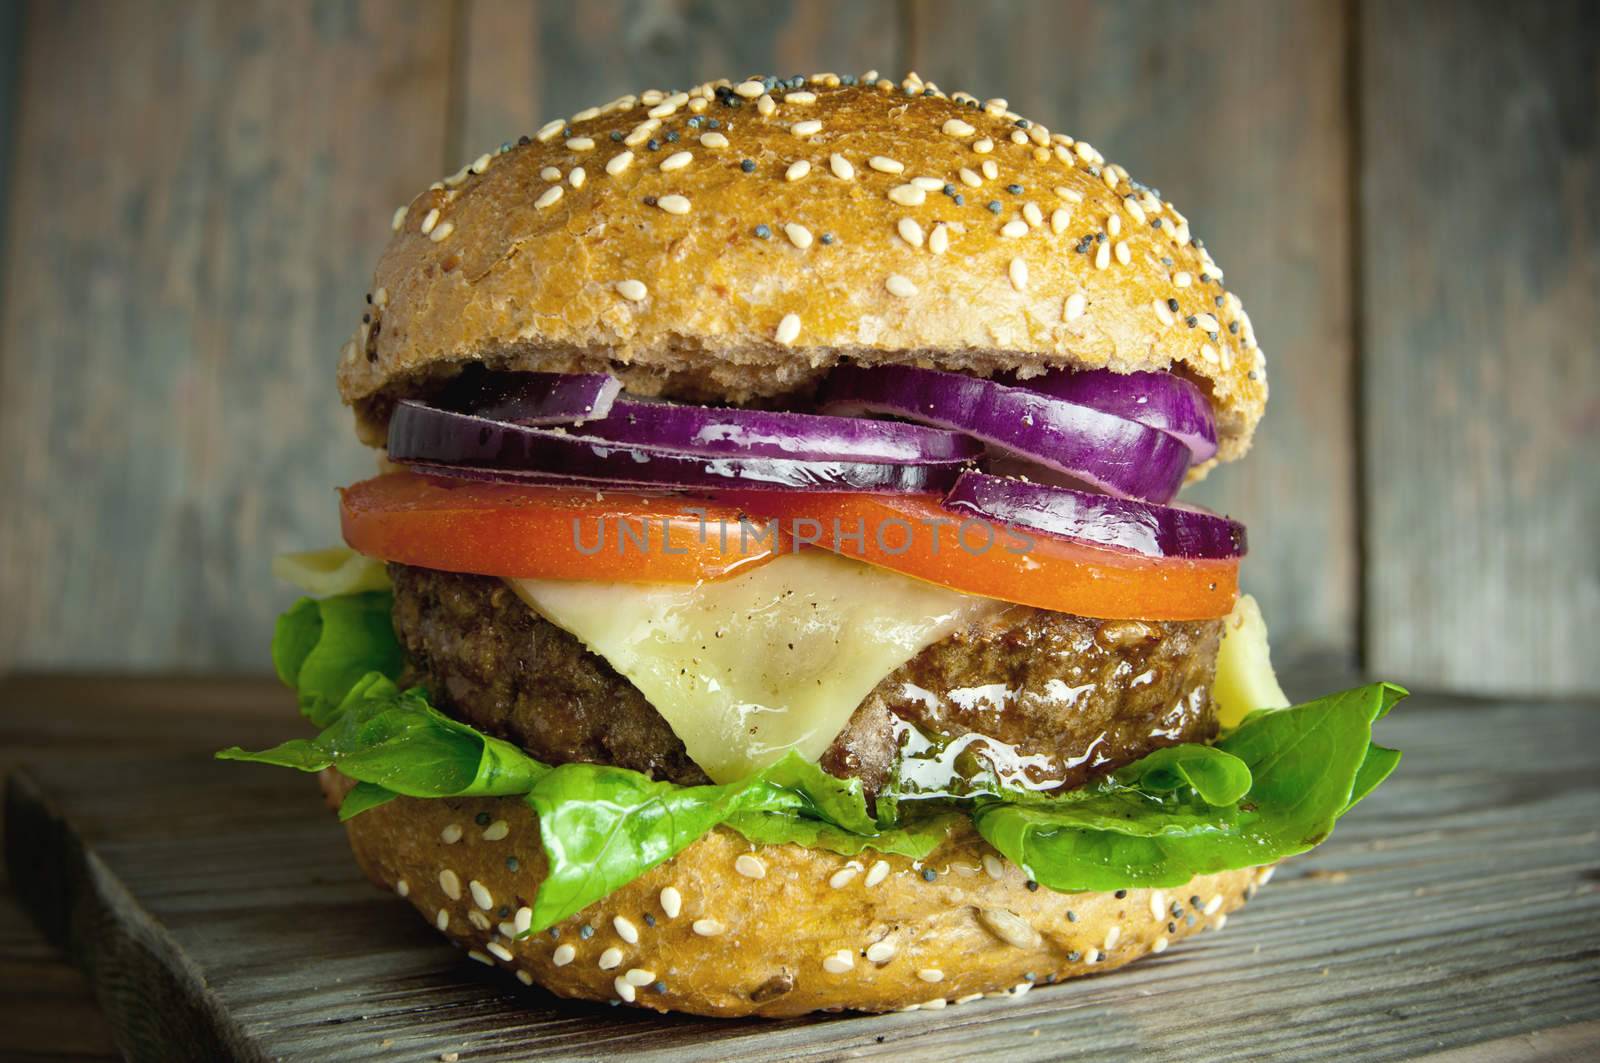 Gourmet burger with cheese, tomato and onion filling on top of a wooden chopping board